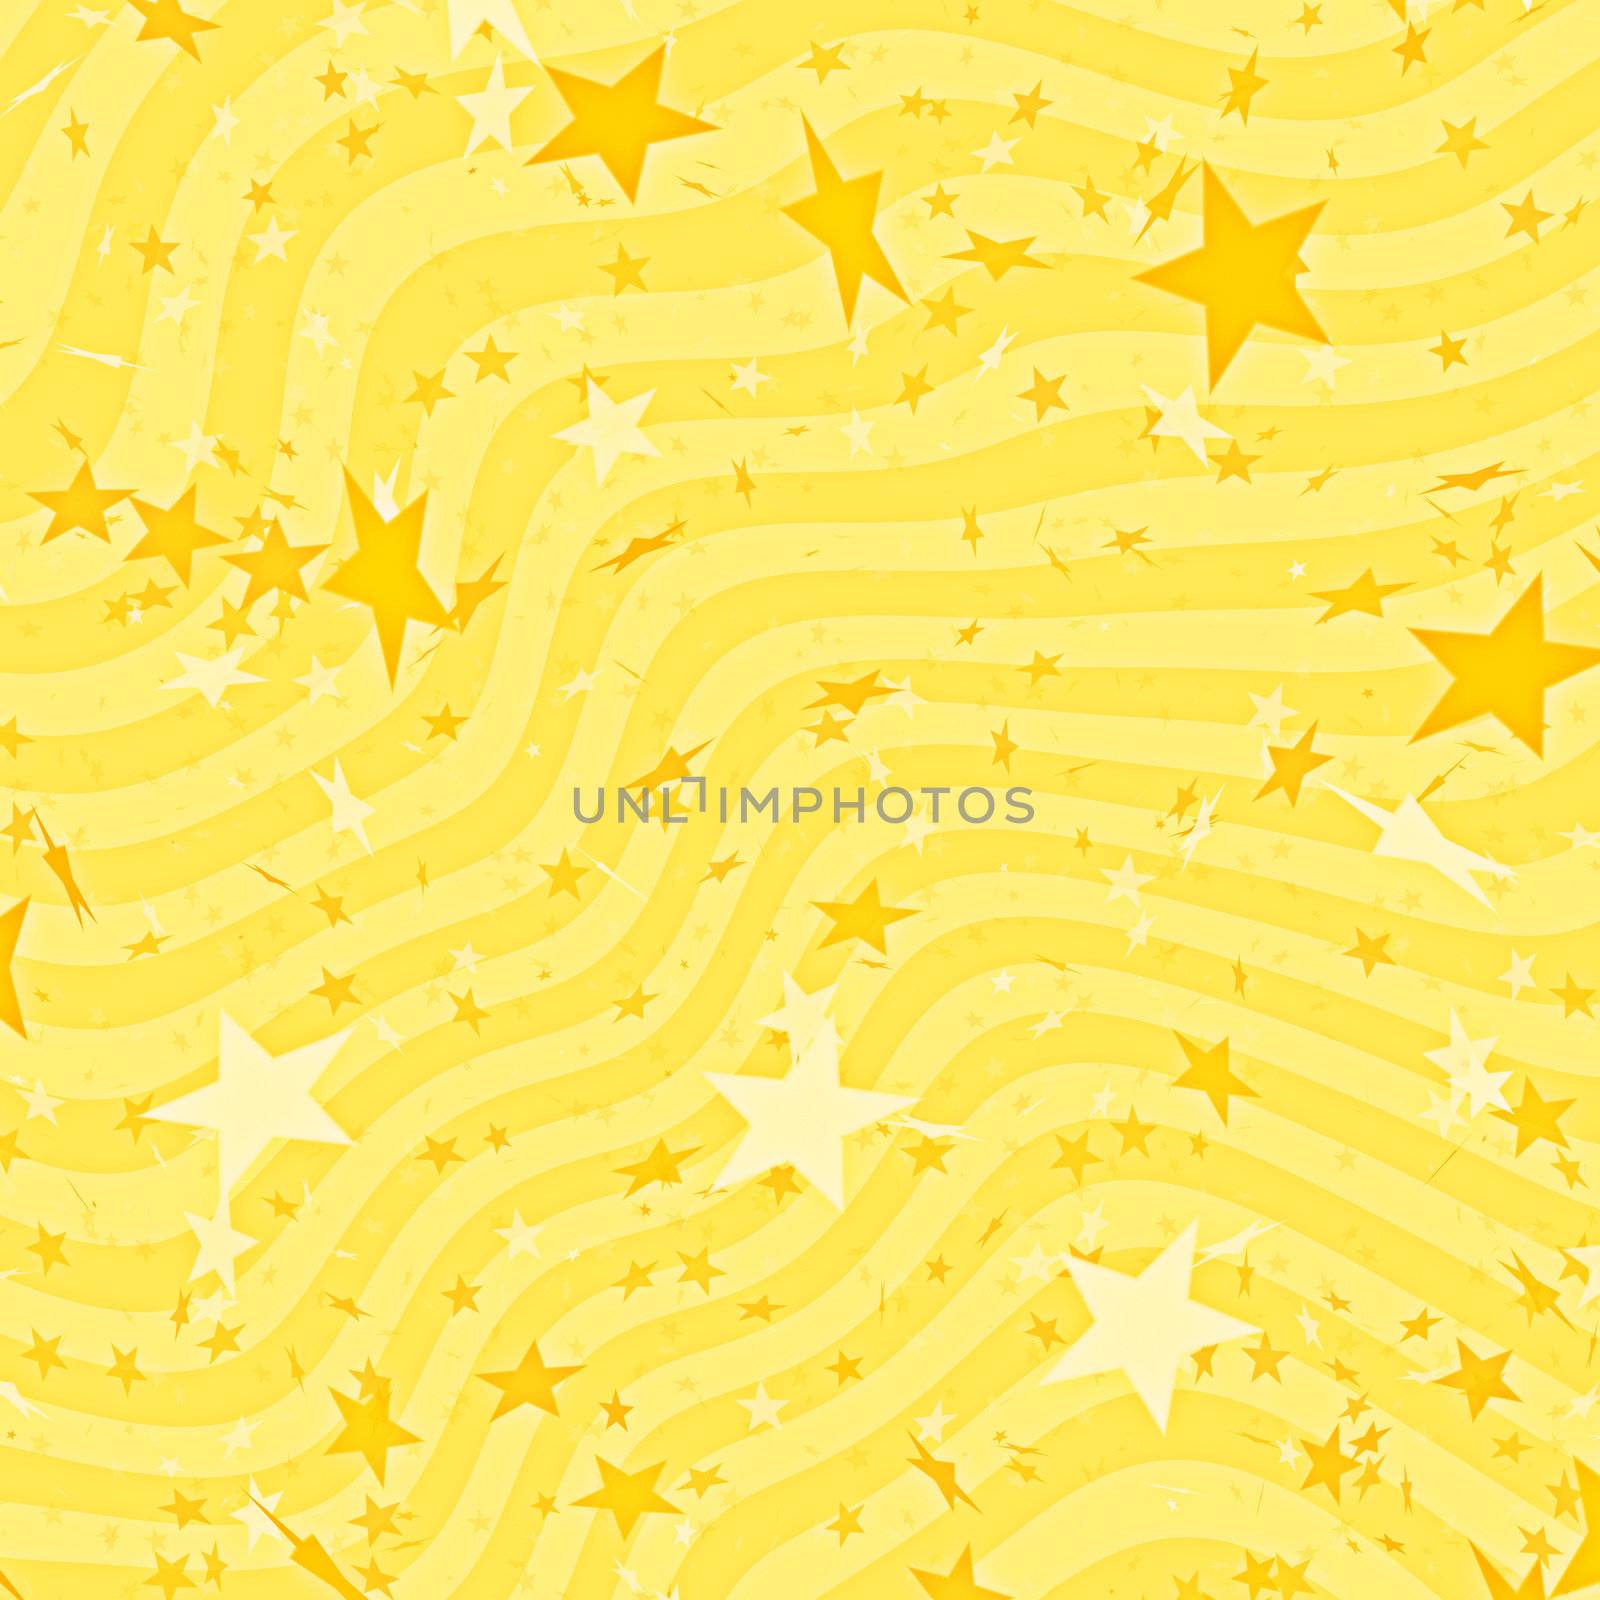 An illustration of a stars and stripes background